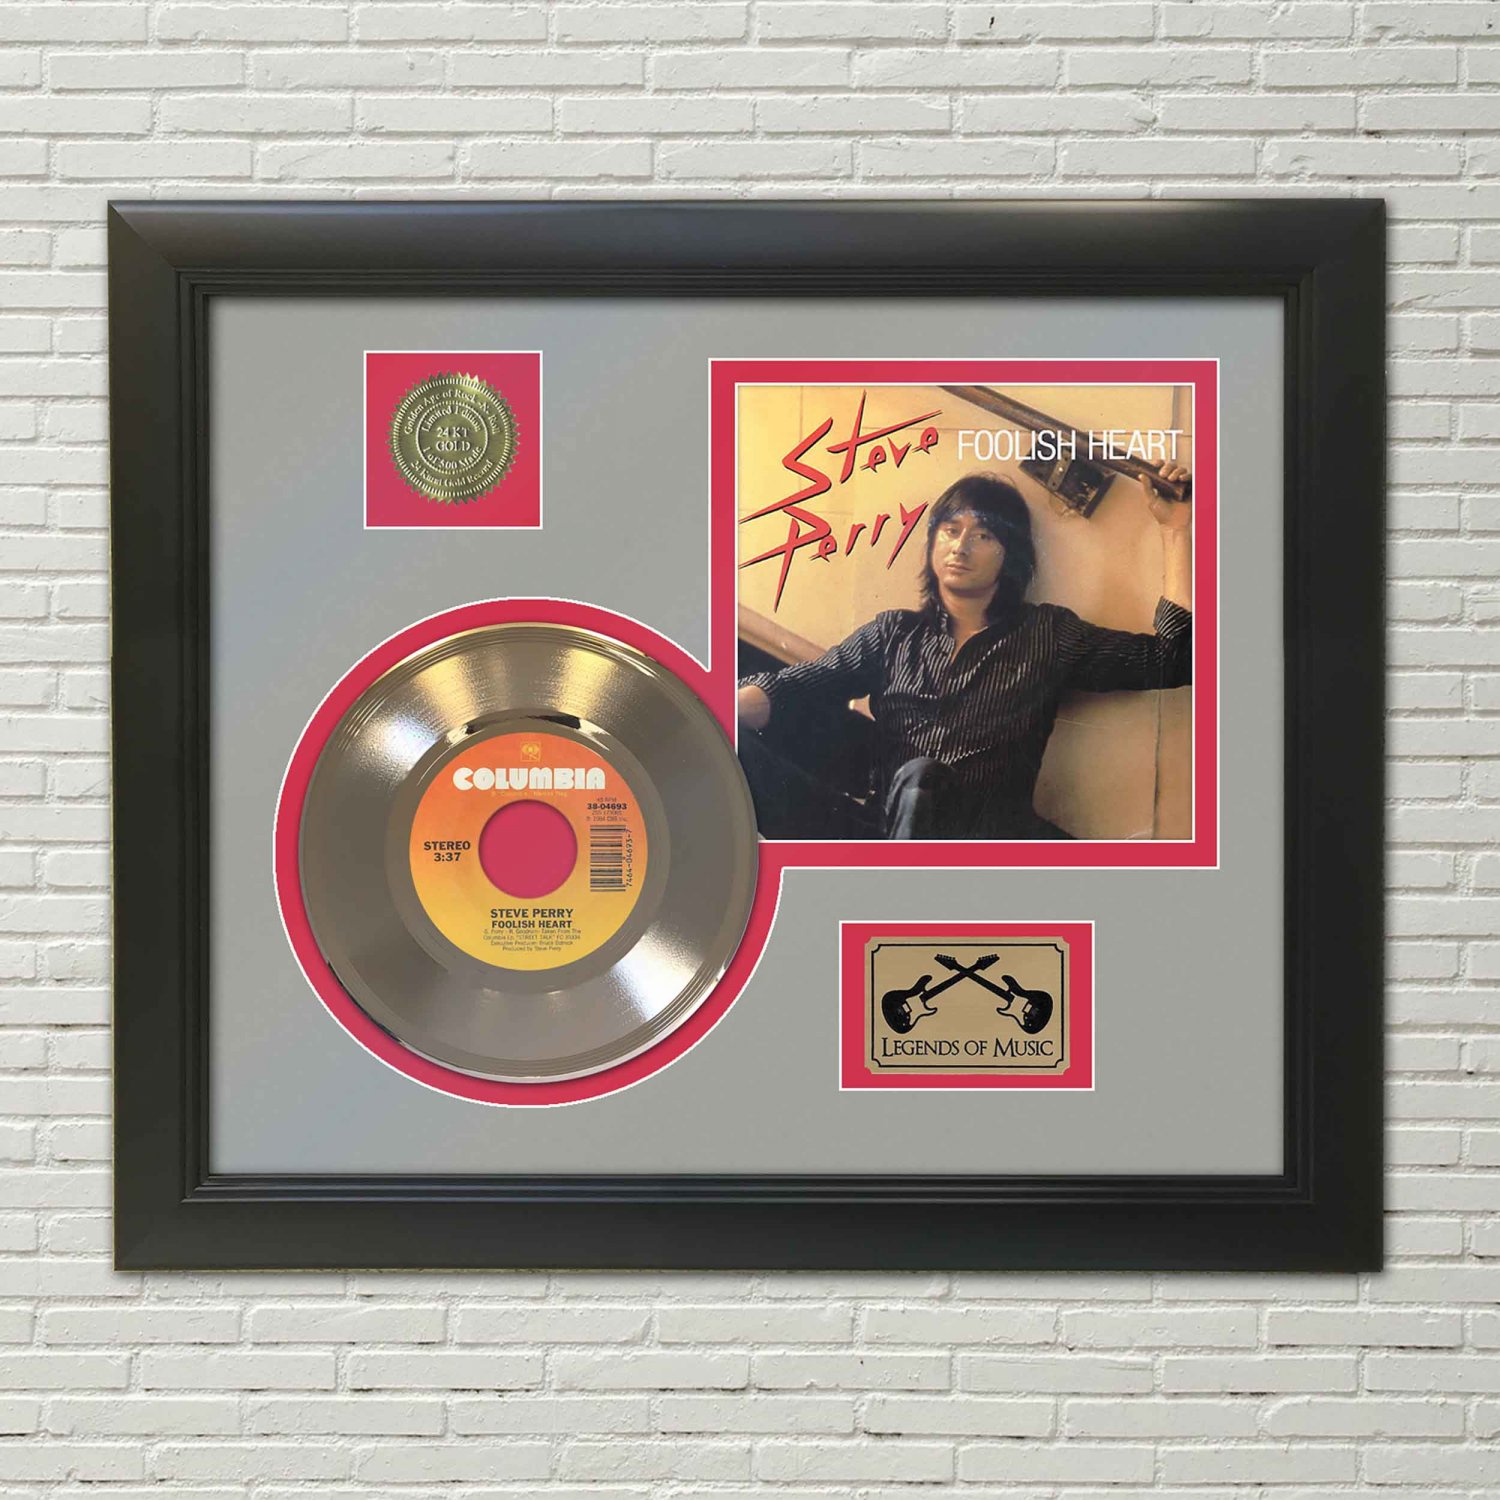 STEVE PERRY "Foolish Heart"  Framed Picture Sleeve Gold 45 Record Display